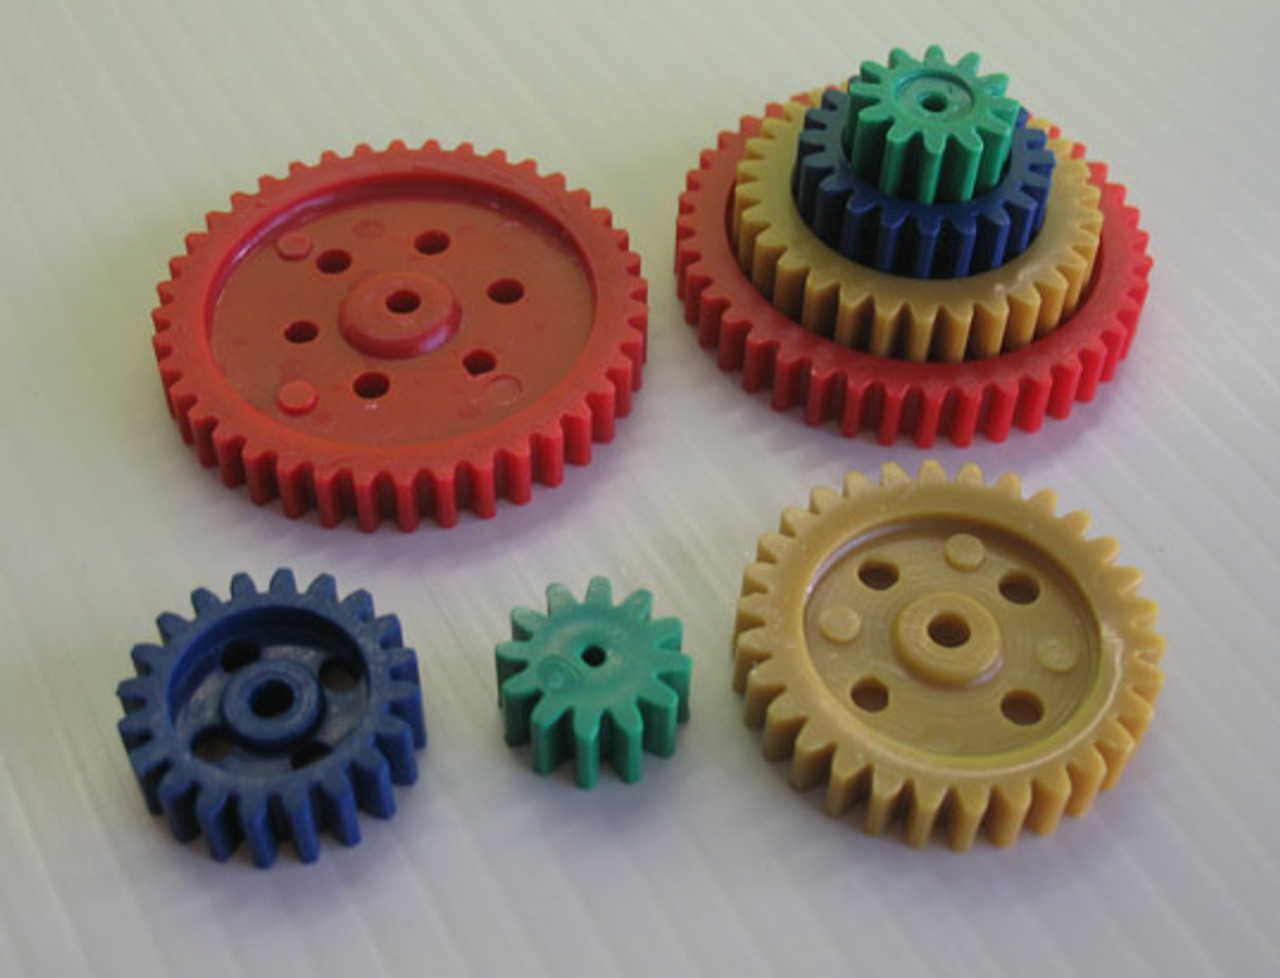 Two sets of gears